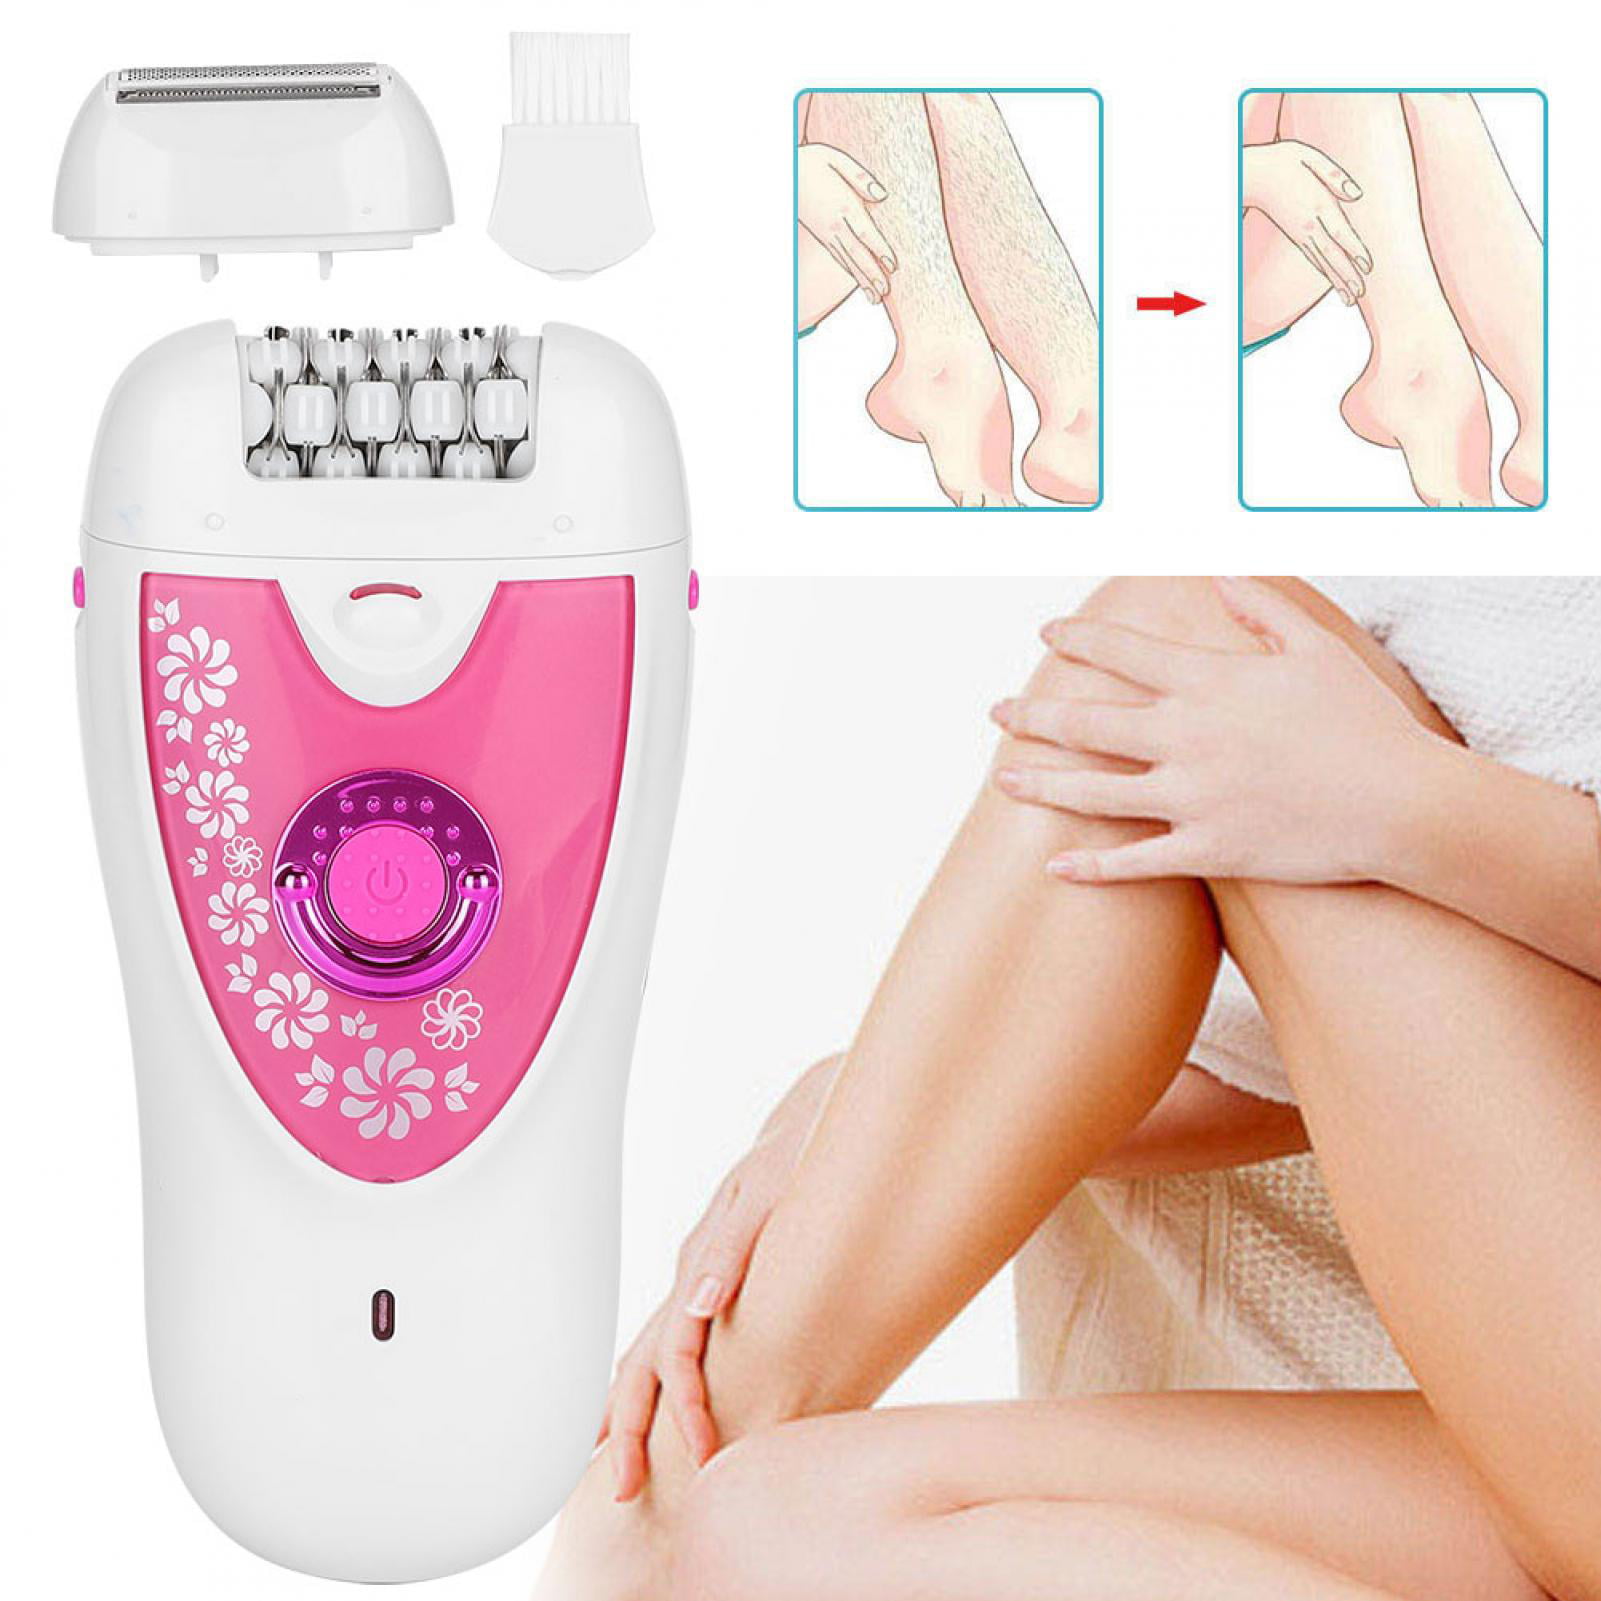 ARIE Facial Hair Removal Machine for Women - Chin, Cheek, Eyebrow, Upper  Lip Hair Remover for Women - Lipstick Shaped and Easy to Carry (12), White  : Amazon.in: Health & Personal Care